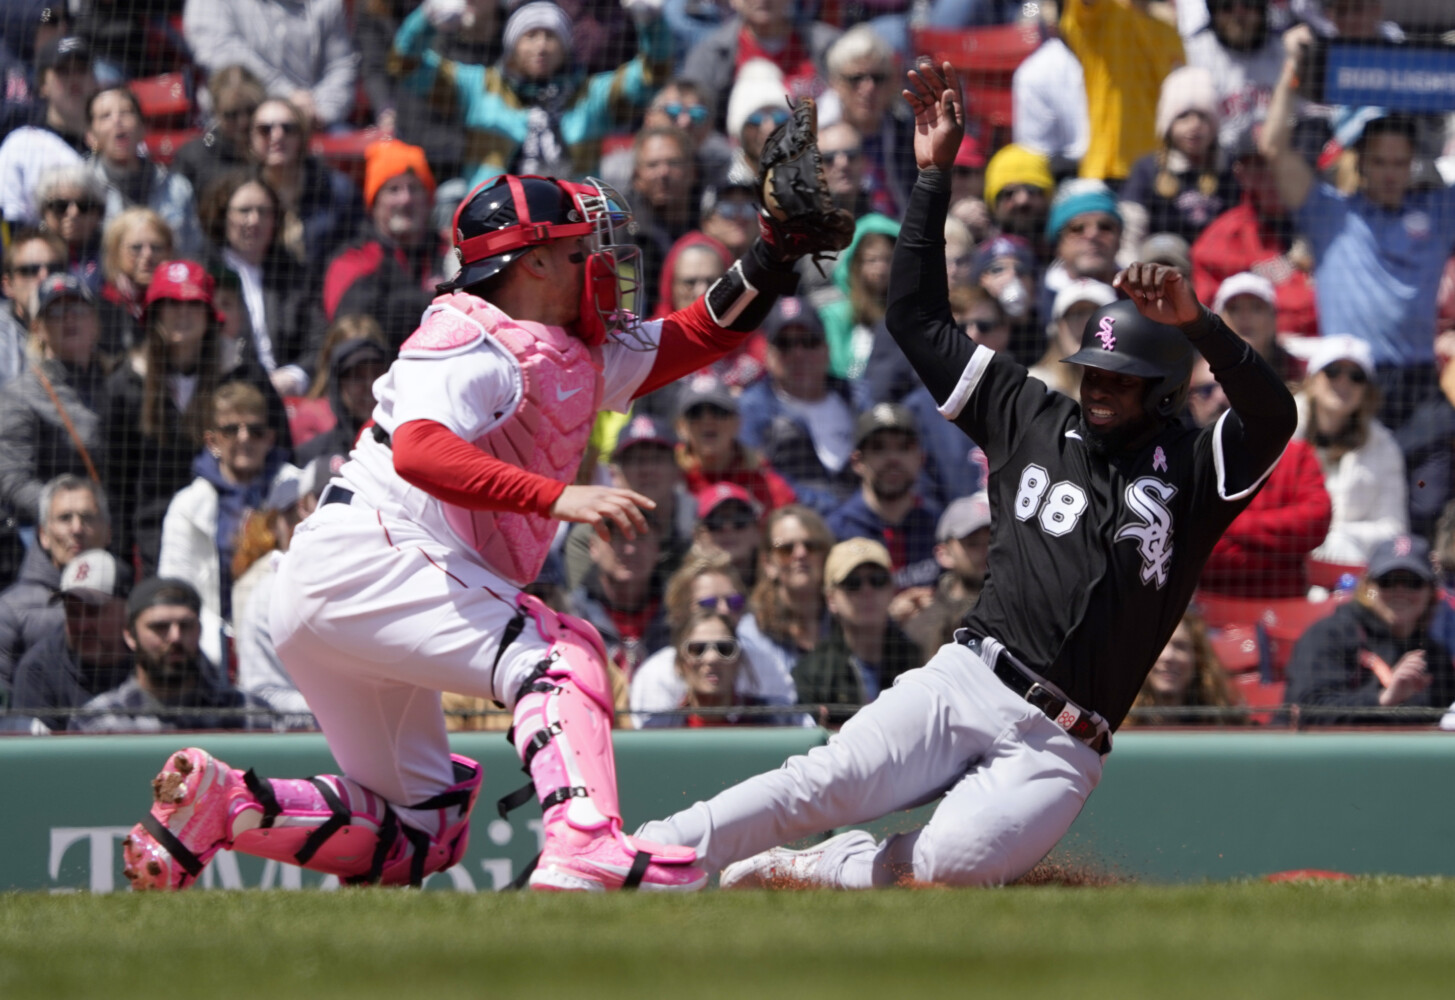 White Sox lose opening series to Angels